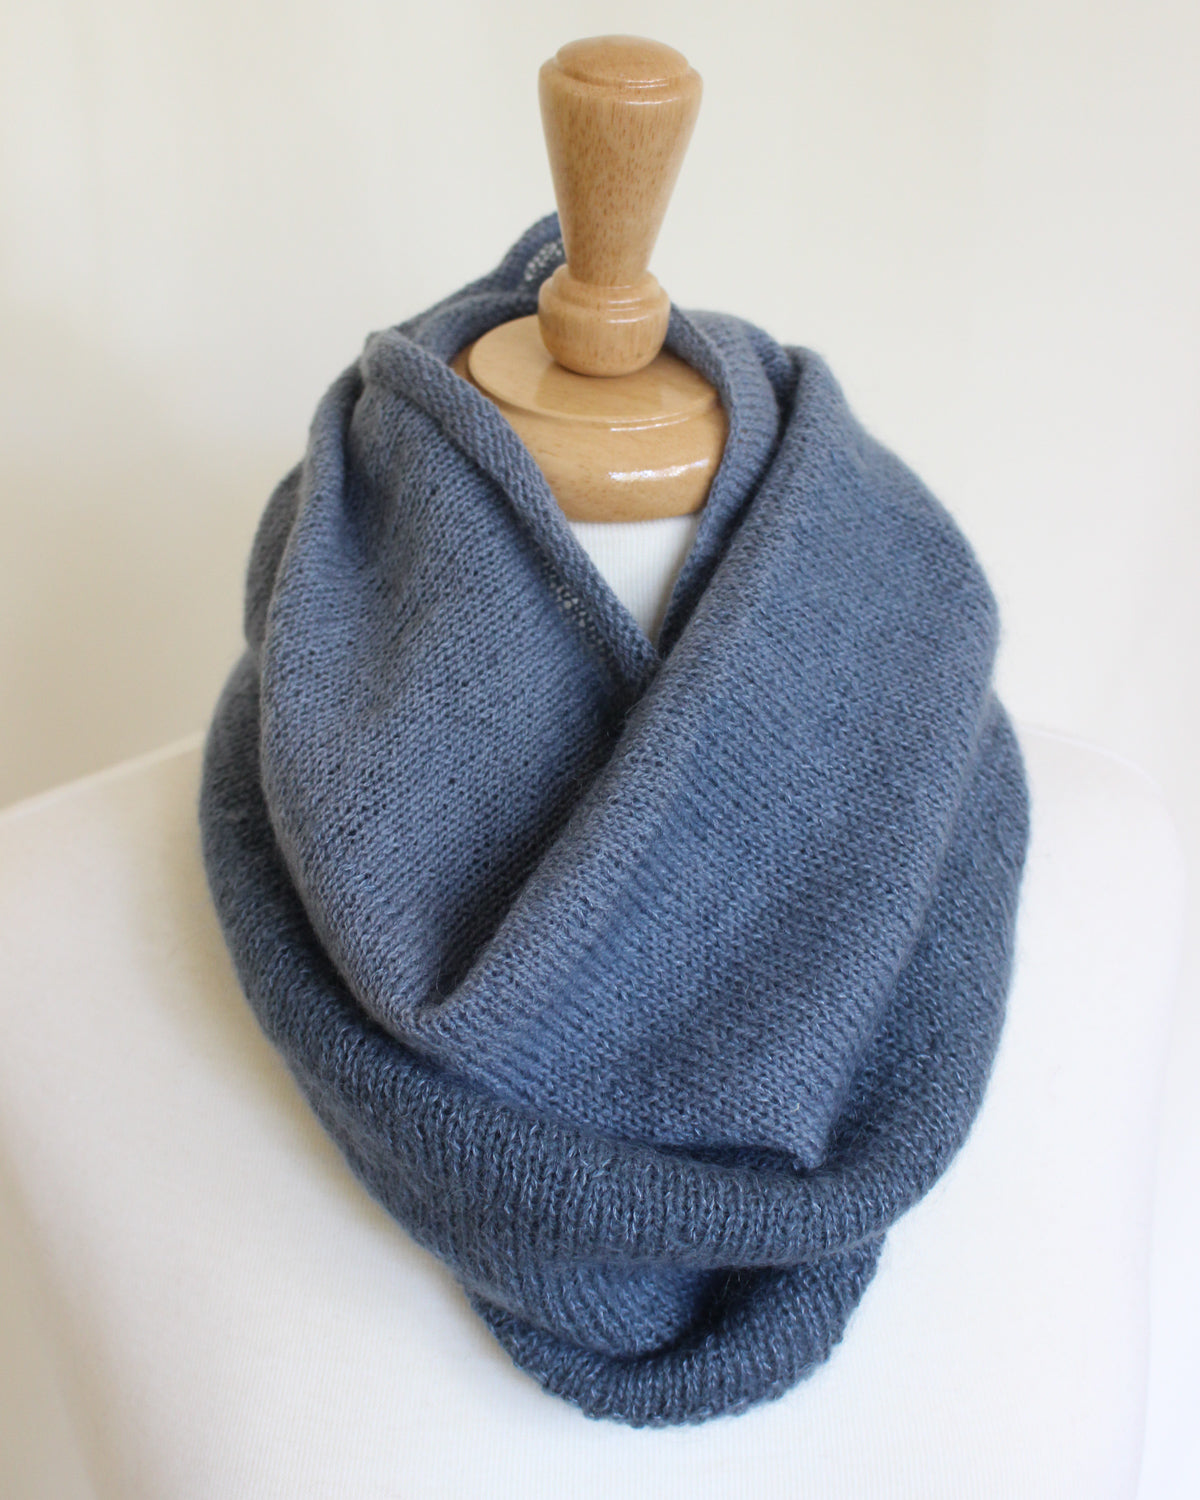 Ogden Point Cowl | Shop Kits Online Today - Beehive Wool Shop